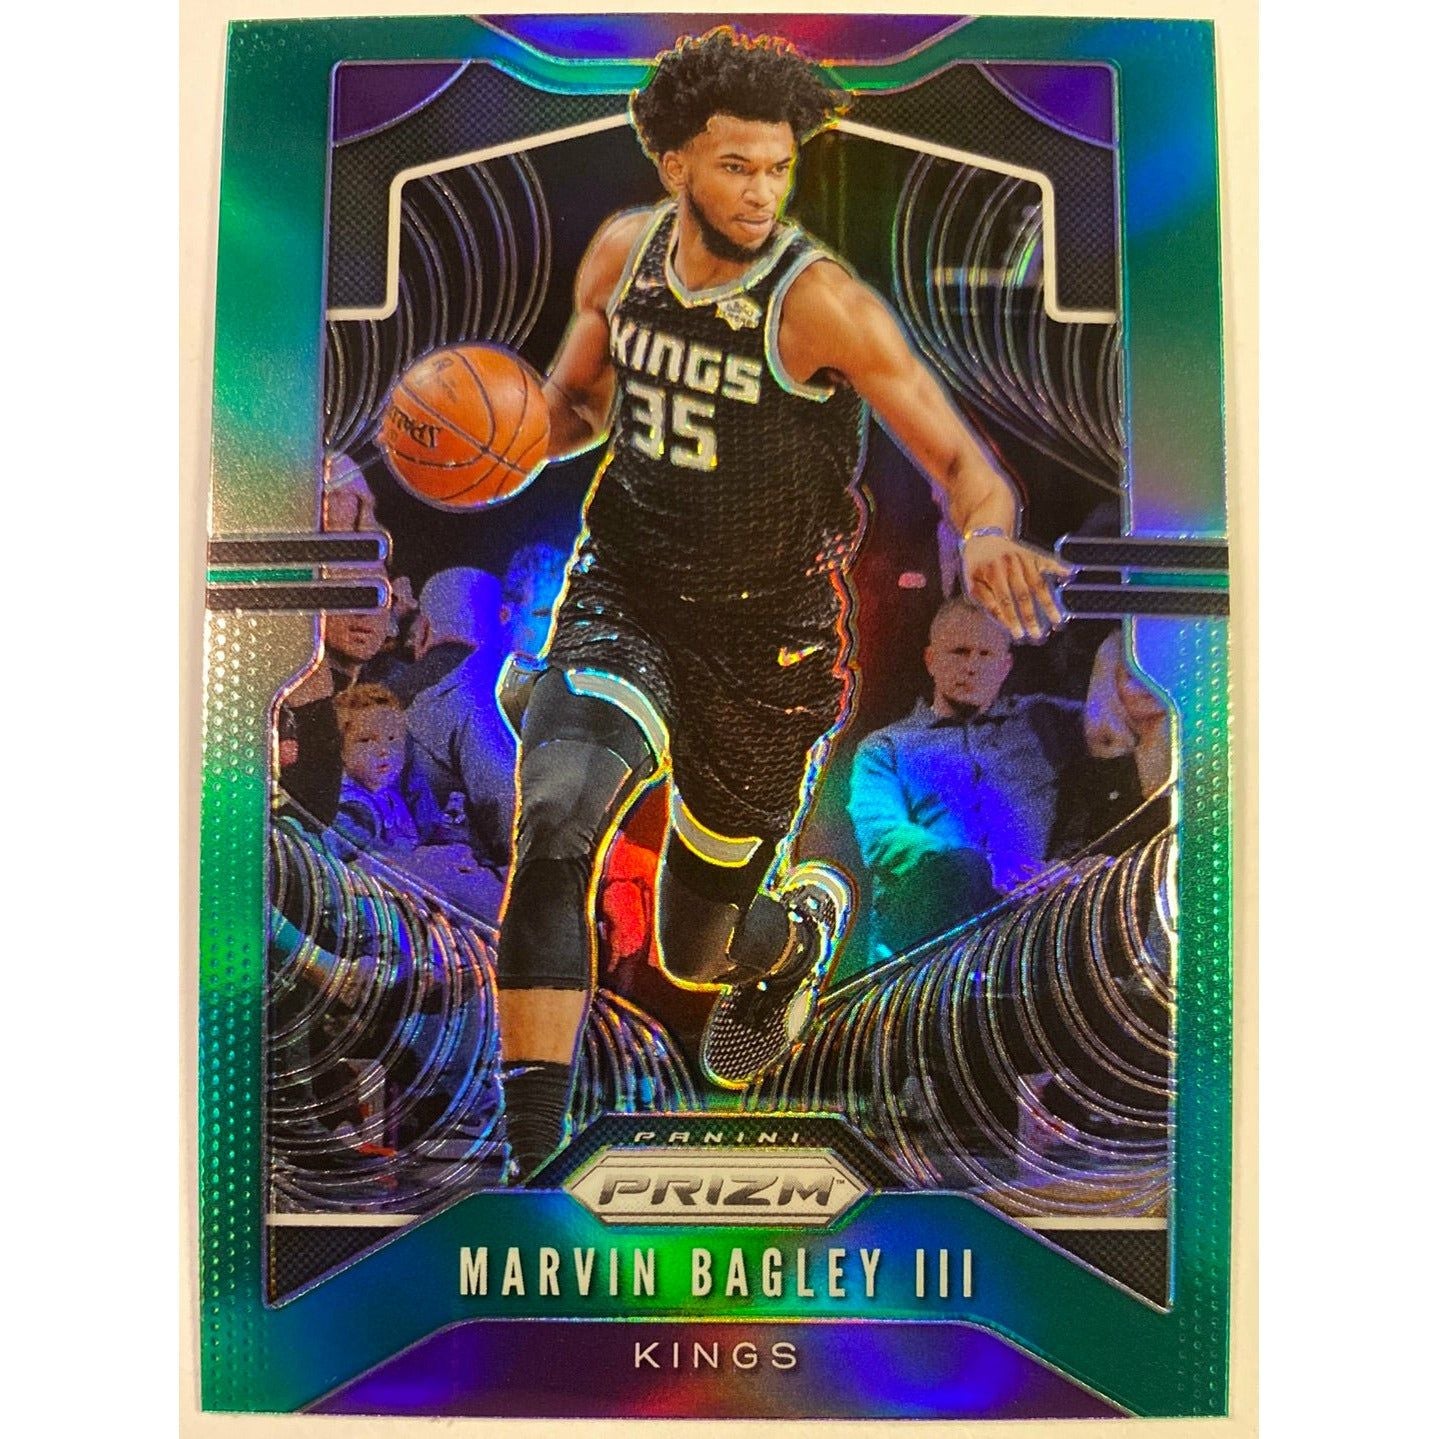  2019-20 Panini Prizm Marvin Bagley lll Green Holo Prizm  Local Legends Cards & Collectibles